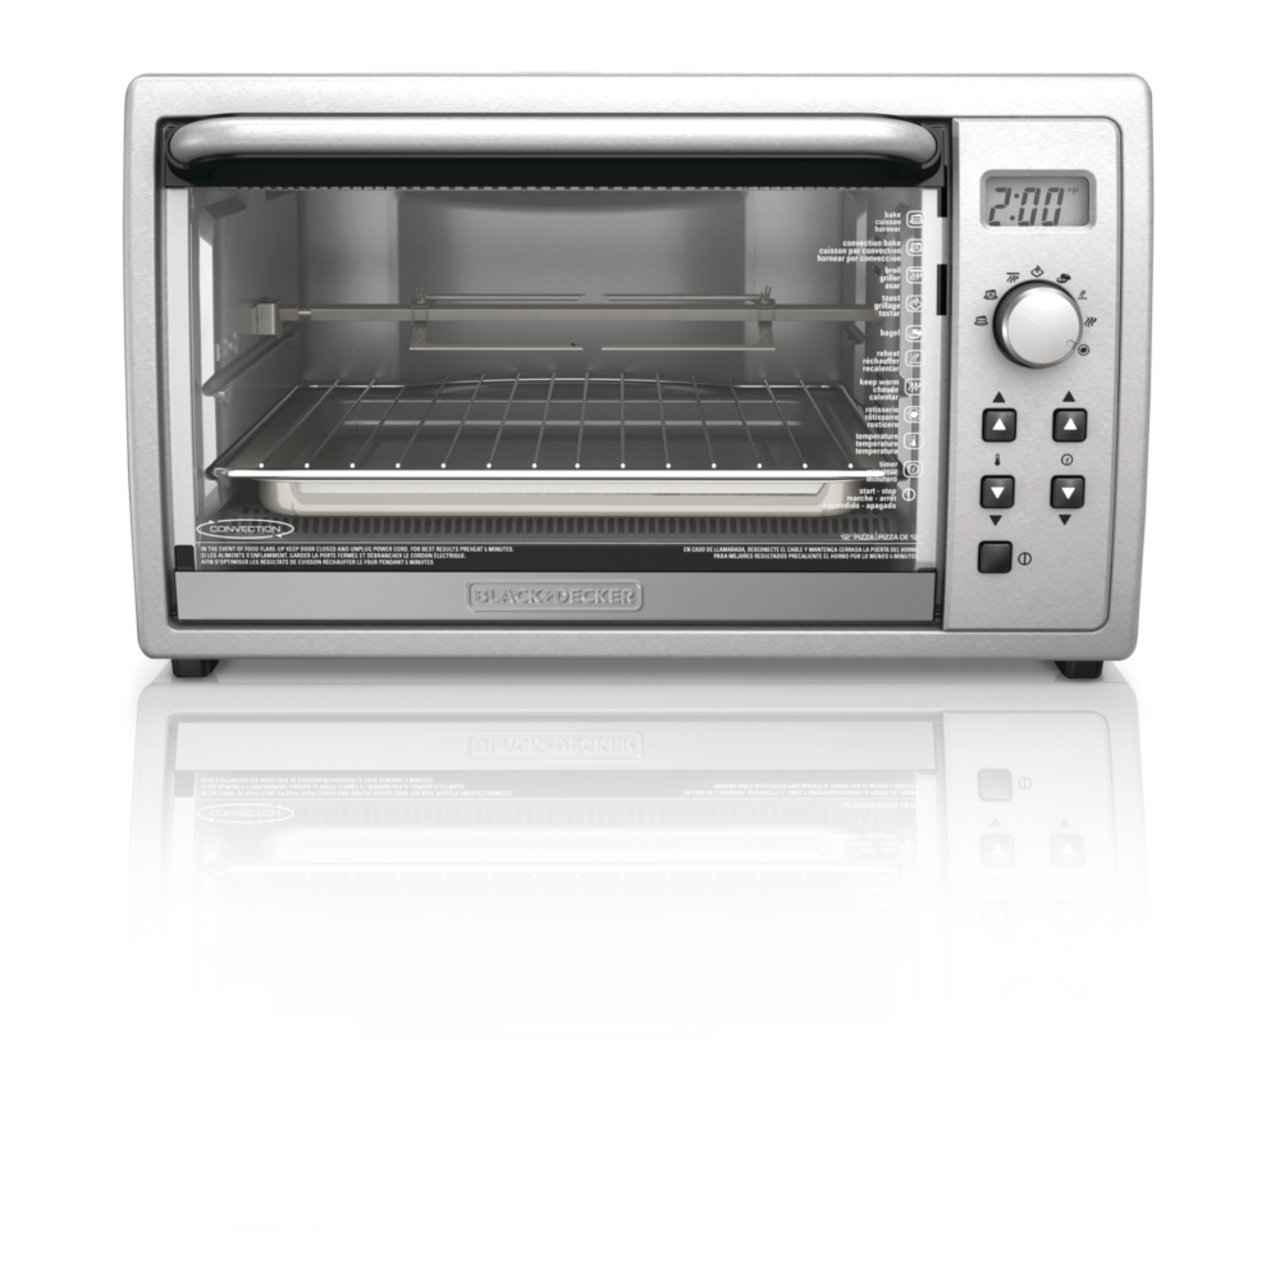 https://media-www.canadiantire.ca/product/living/kitchen/kitchen-appliances/0432222/black-decker-kitchen-tools-6-slice-convection-toaster-oven-1c468b31-a981-4aa0-9d12-0b1e27ba54d9.png?imdensity=1&imwidth=1244&impolicy=mZoom